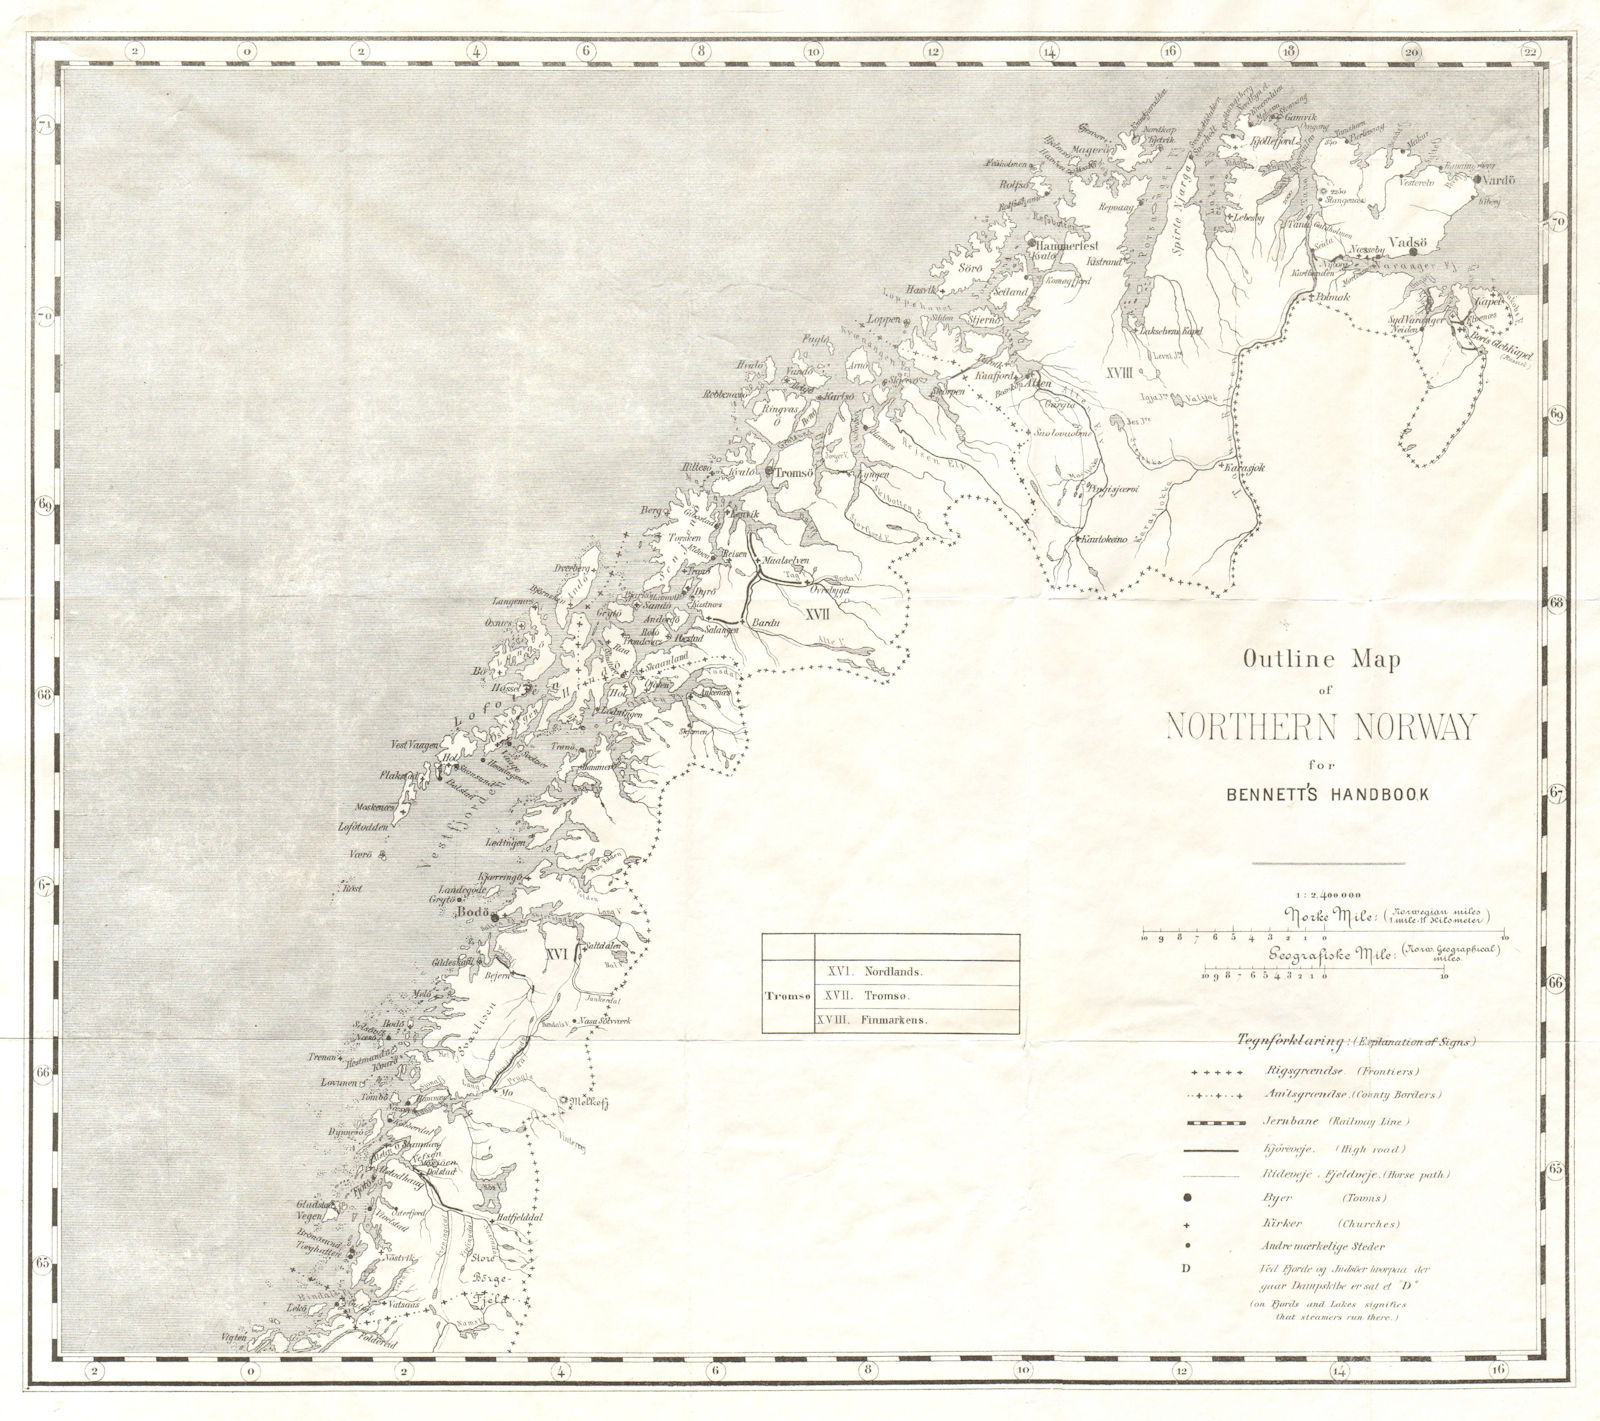 Associate Product NORTHERN NORWAY showing railways & Rideveje Fjeldveje (horse paths) 1896 map